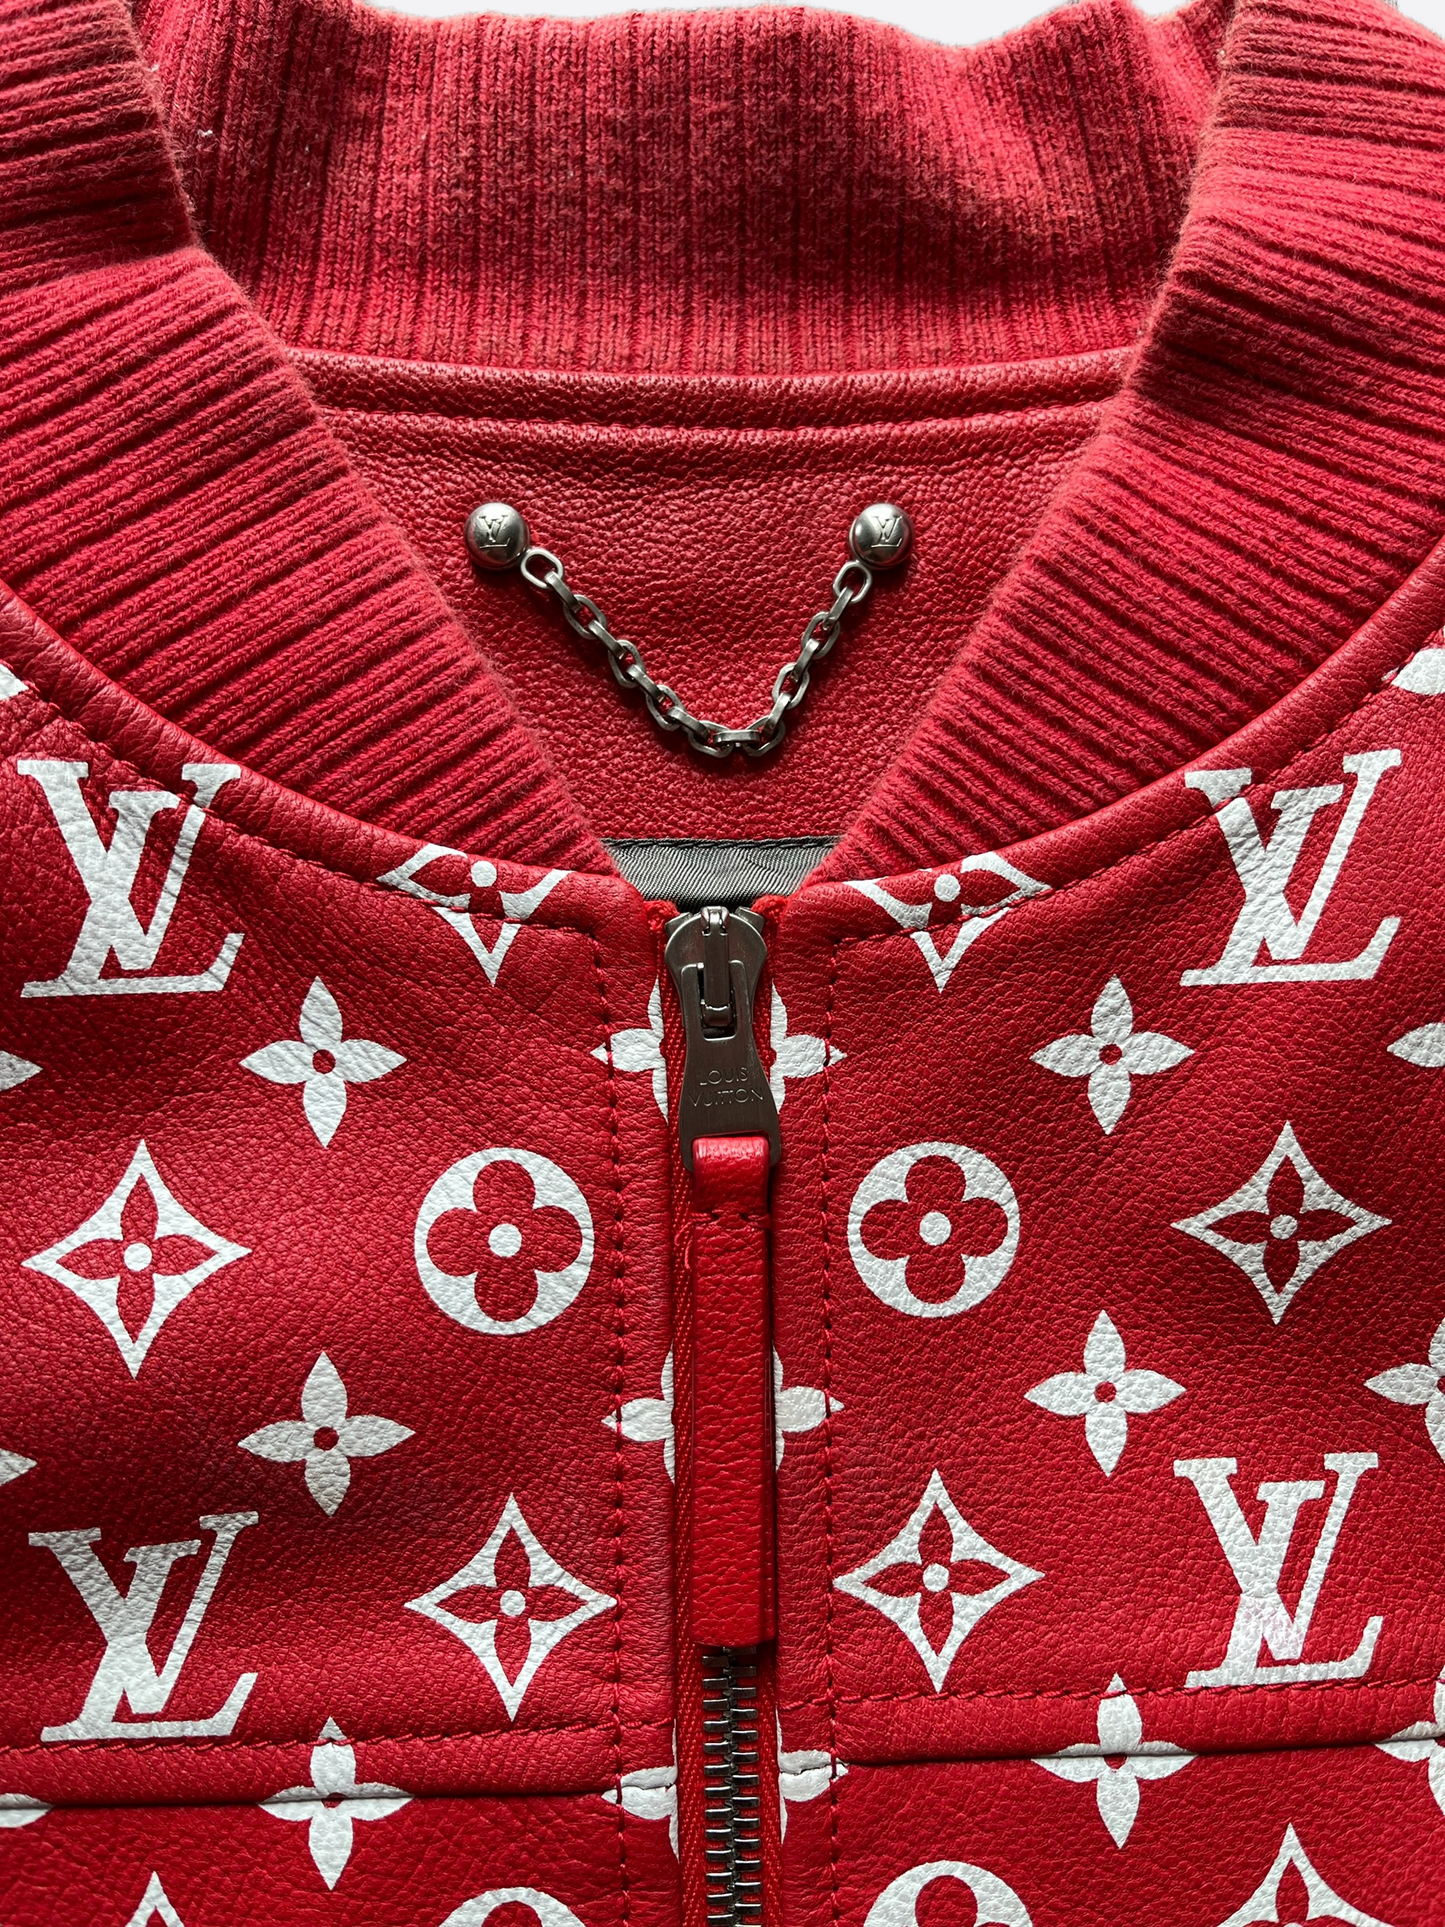 Louis Vuitton X Supreme Red Monogrammed Leather Bomber Jacket M